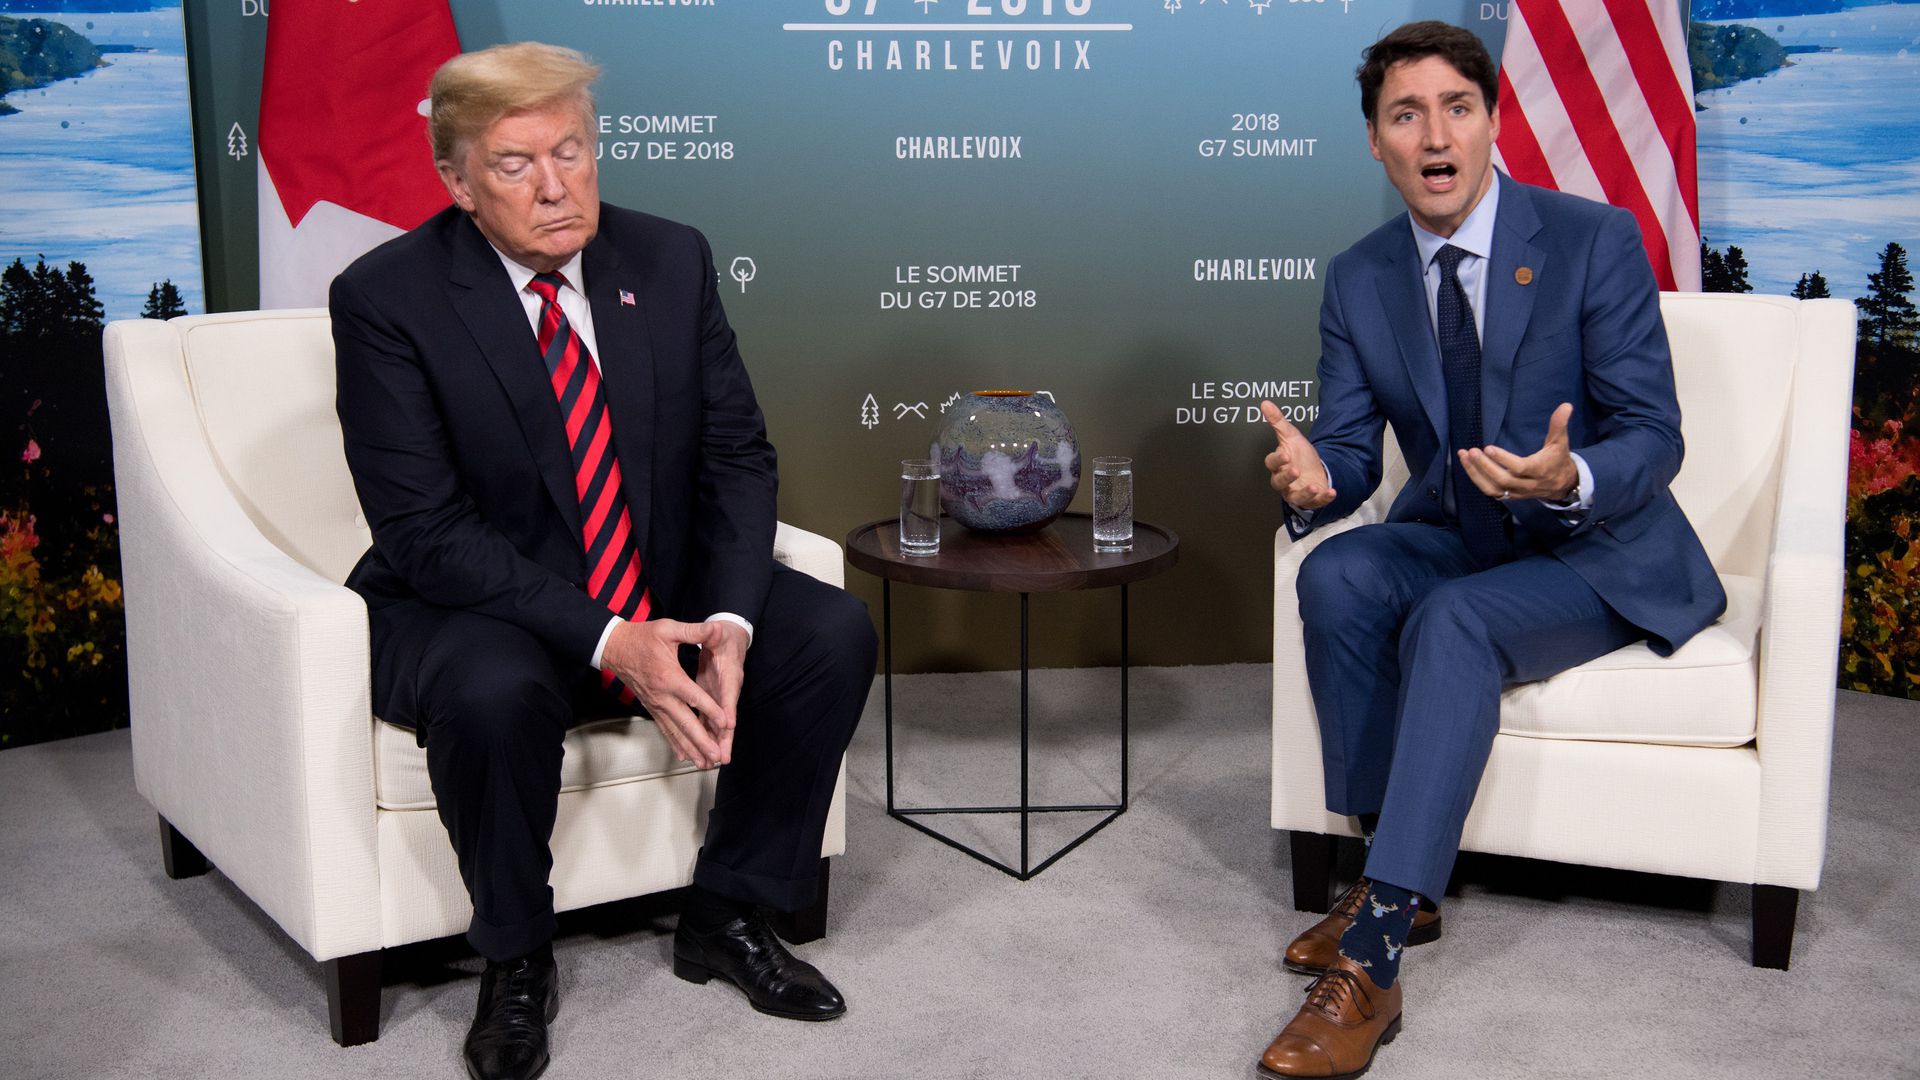  United States President Donald Trump and Canadian Prime Minister Justin Trudeau